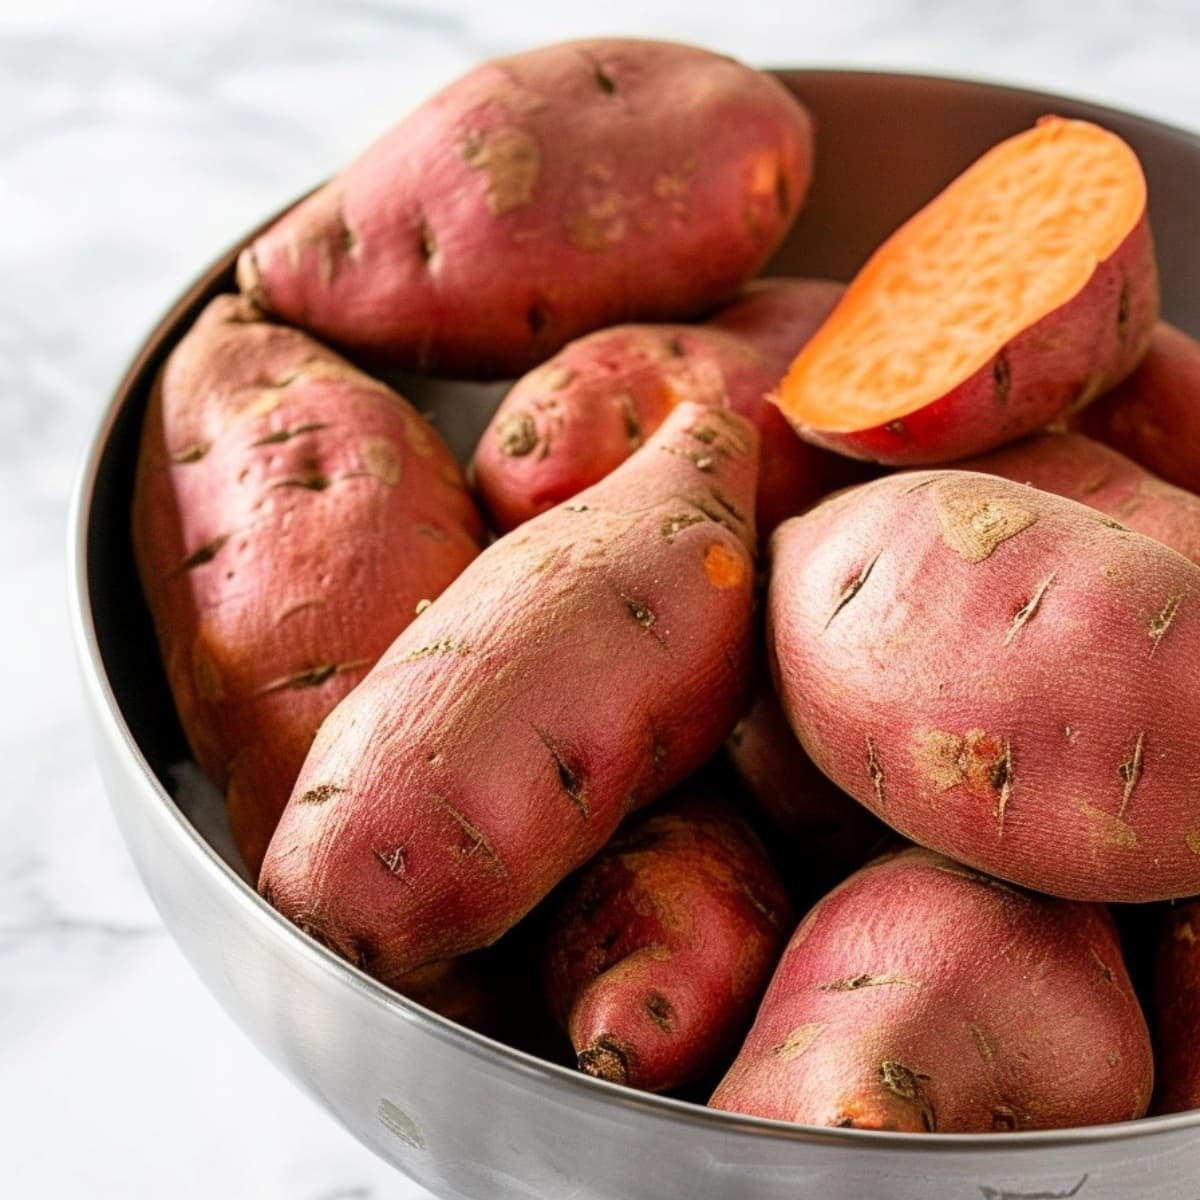 Sweet potatoes in stainless bowl